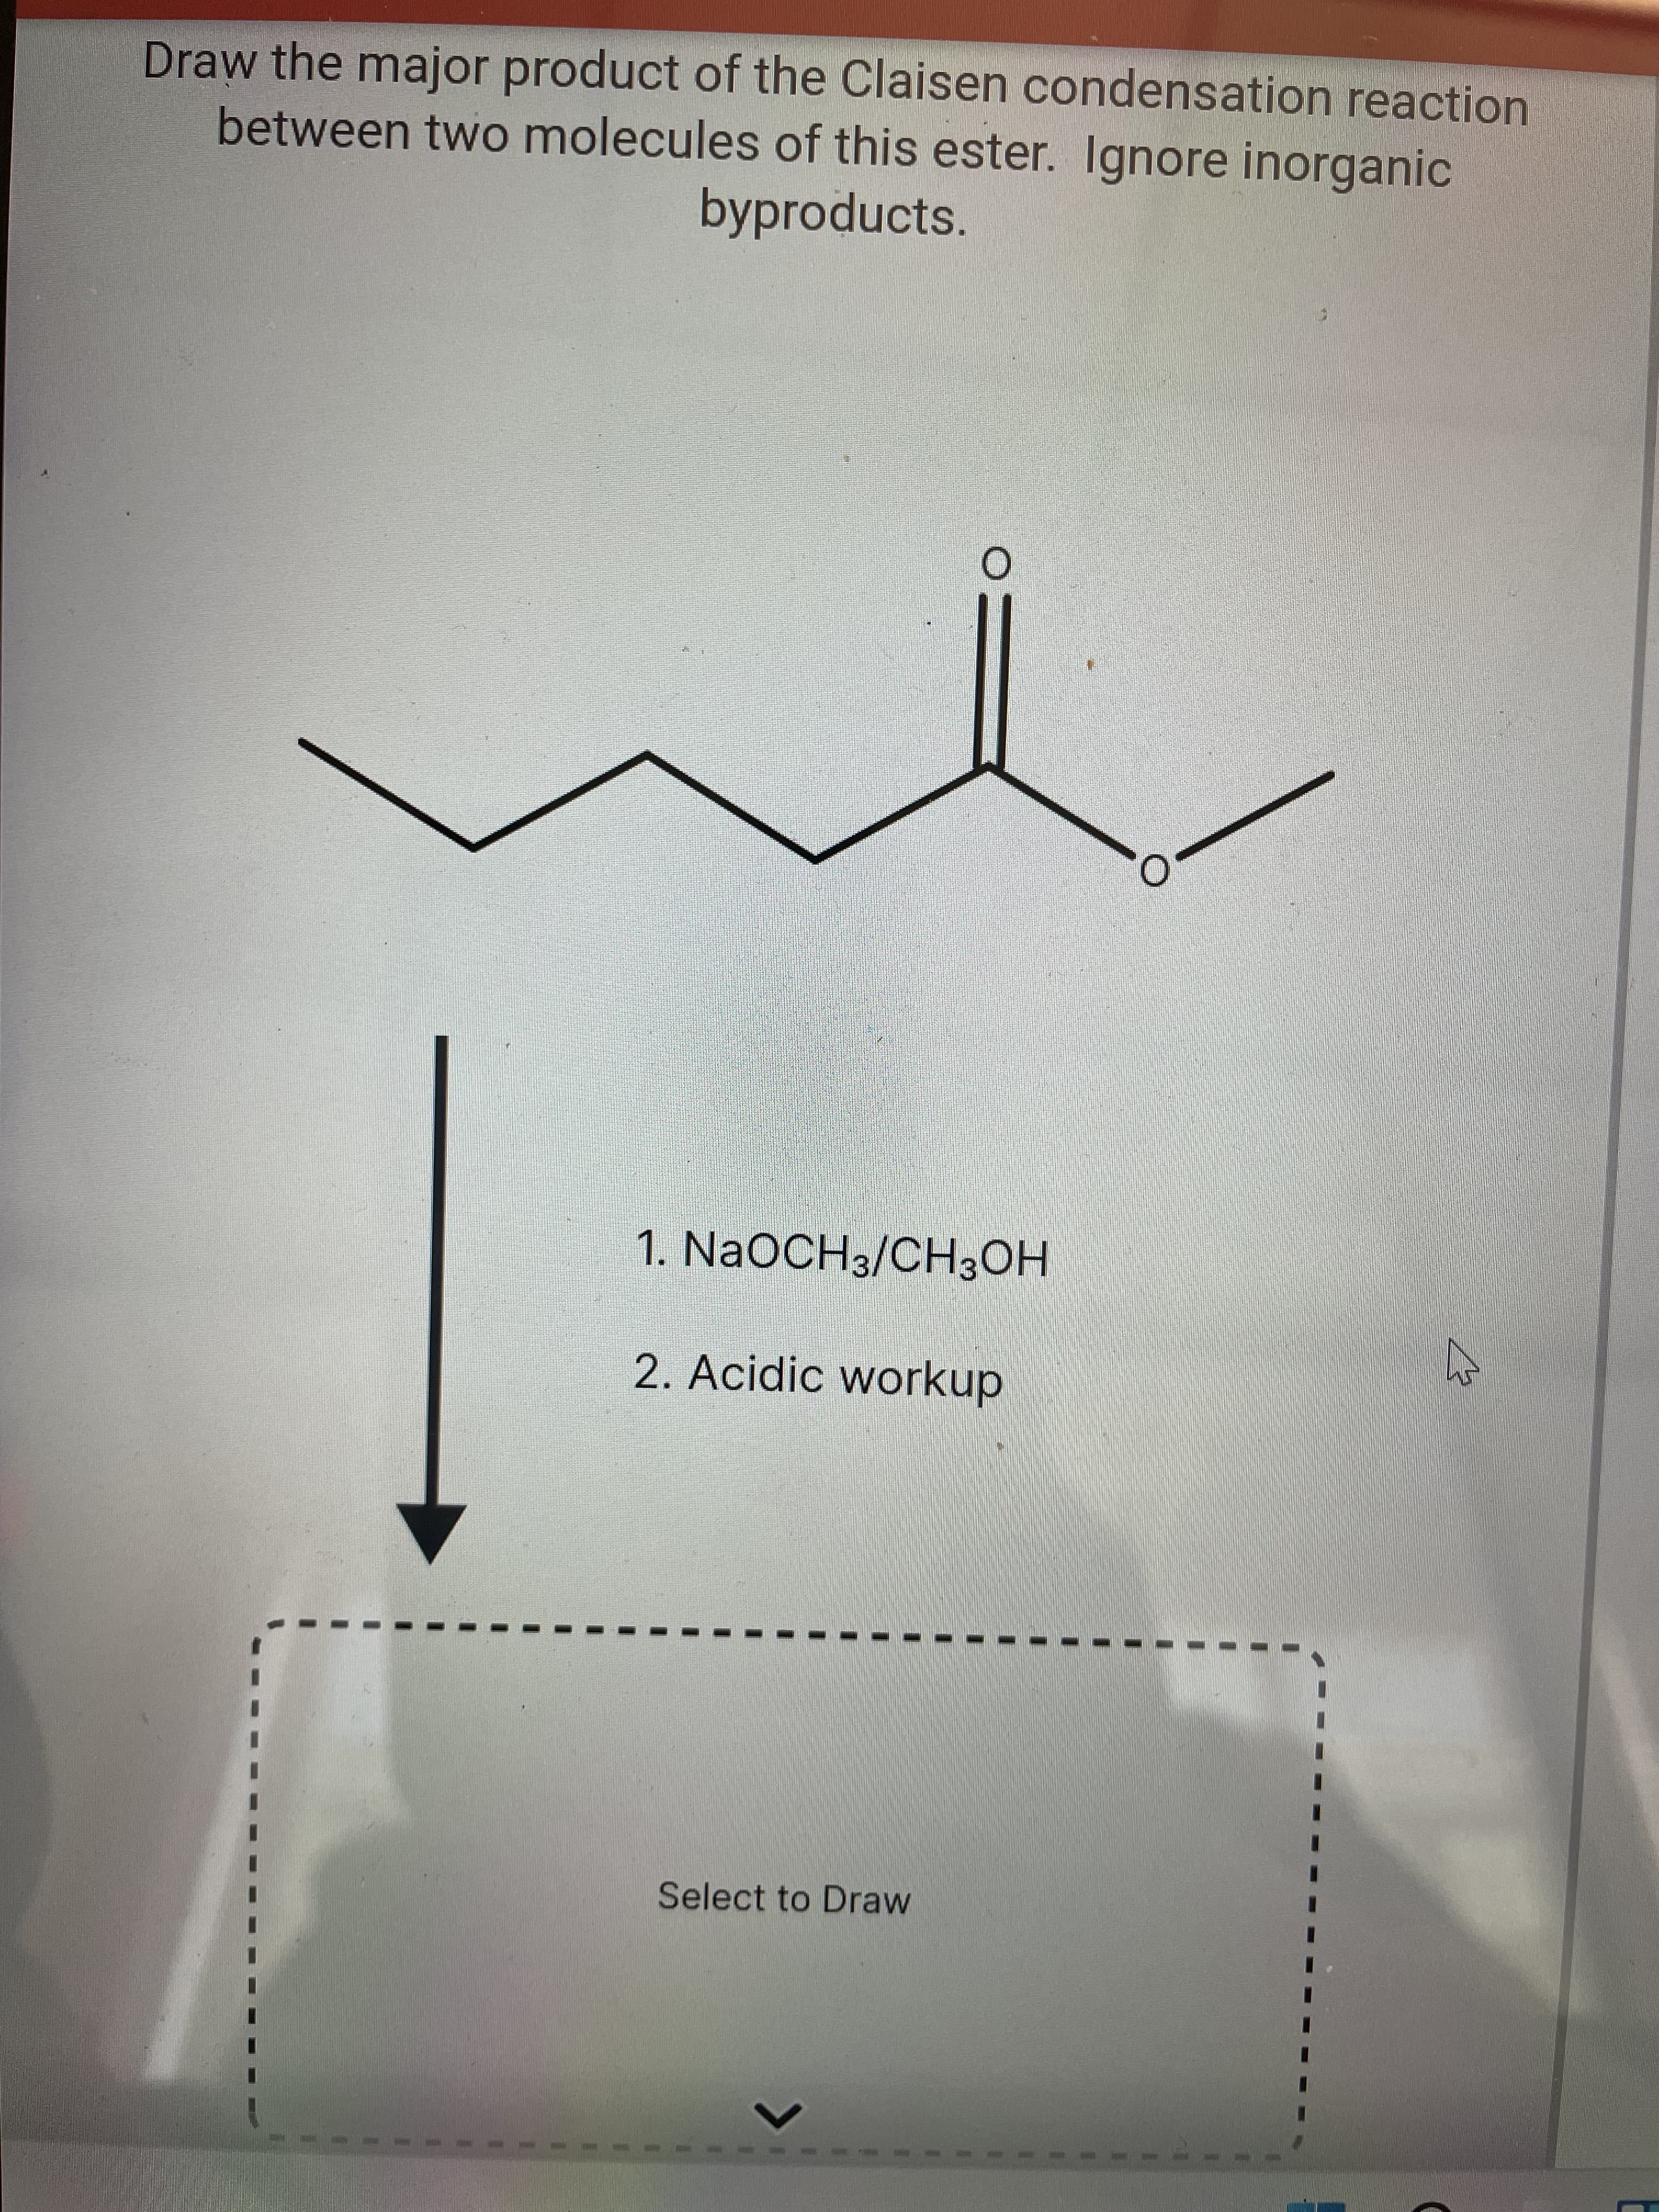 Draw the major product of the Claisen condensation reaction
between two molecules of this ester. Ignore inorganic
byproducts.
1. NaOCH3/CH3OH
2. Acidic workup
Select to Draw
